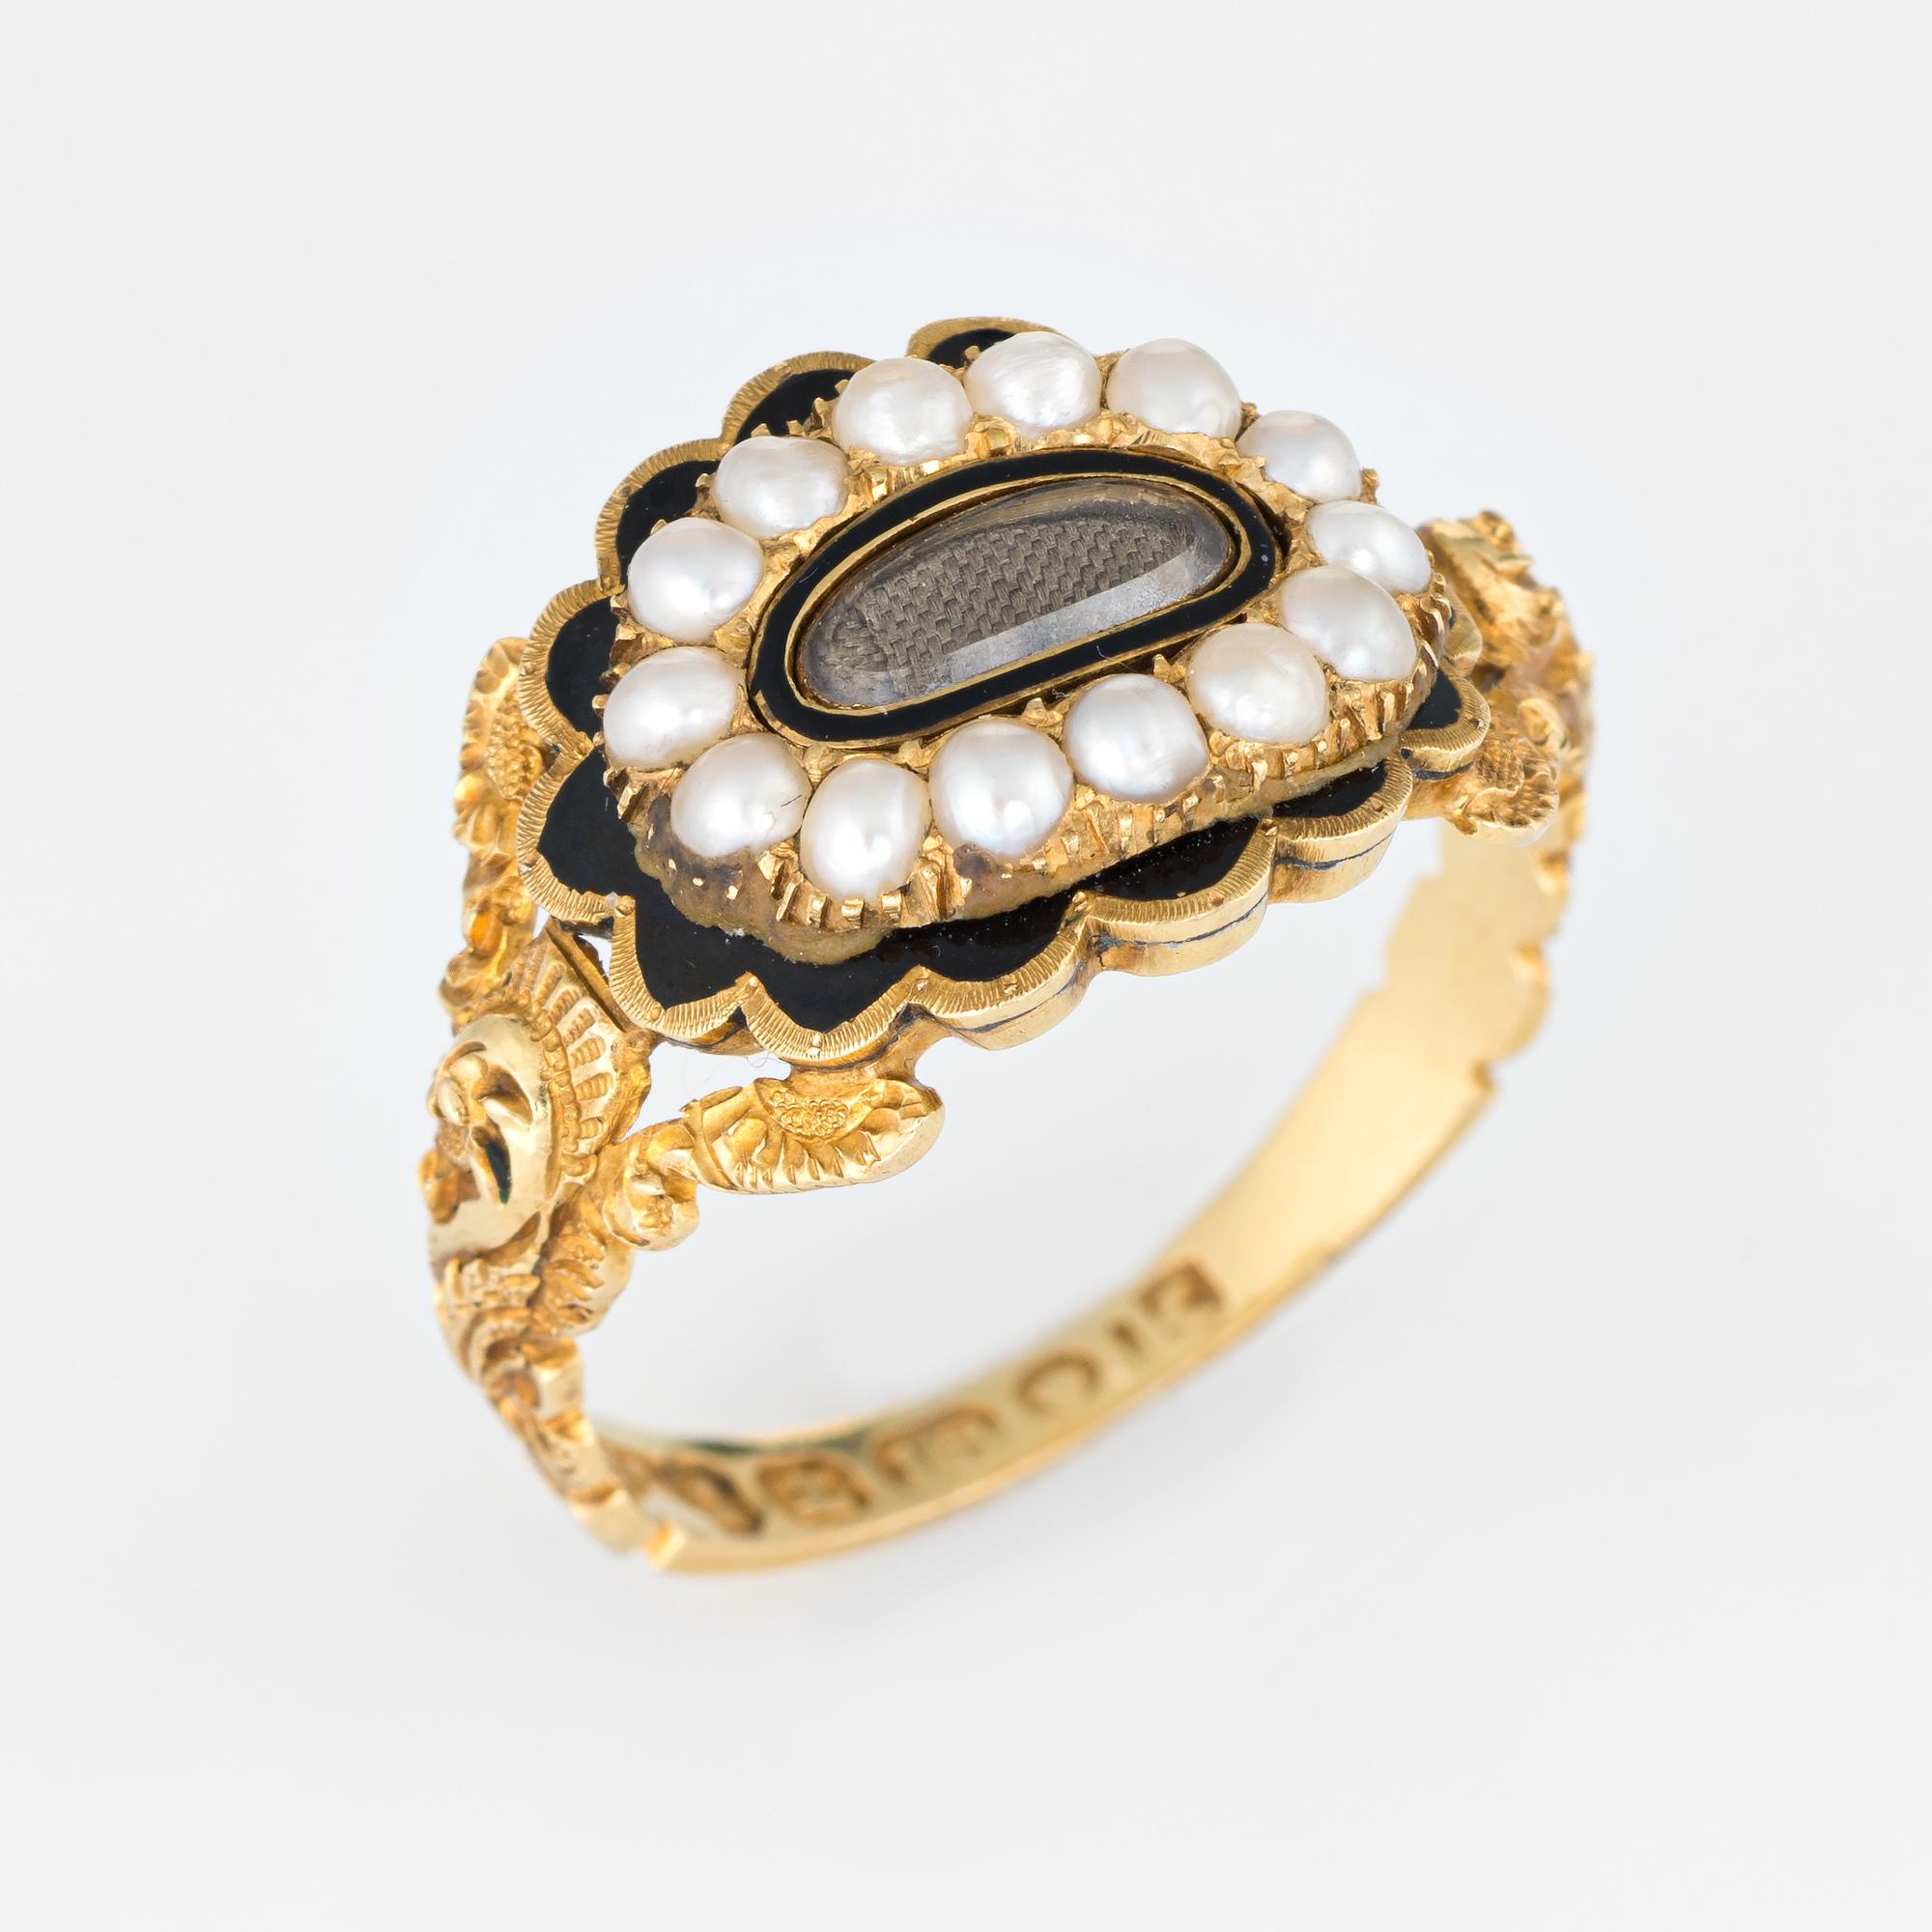 Antique Georgian era memorial ring (circa 1825) crafted in 18 karat yellow gold. 

Natural pearls measuring (average) 2.5mm border an oval compartment that holds natural hair. The pearls are in very good condition showing good luster. The glass case